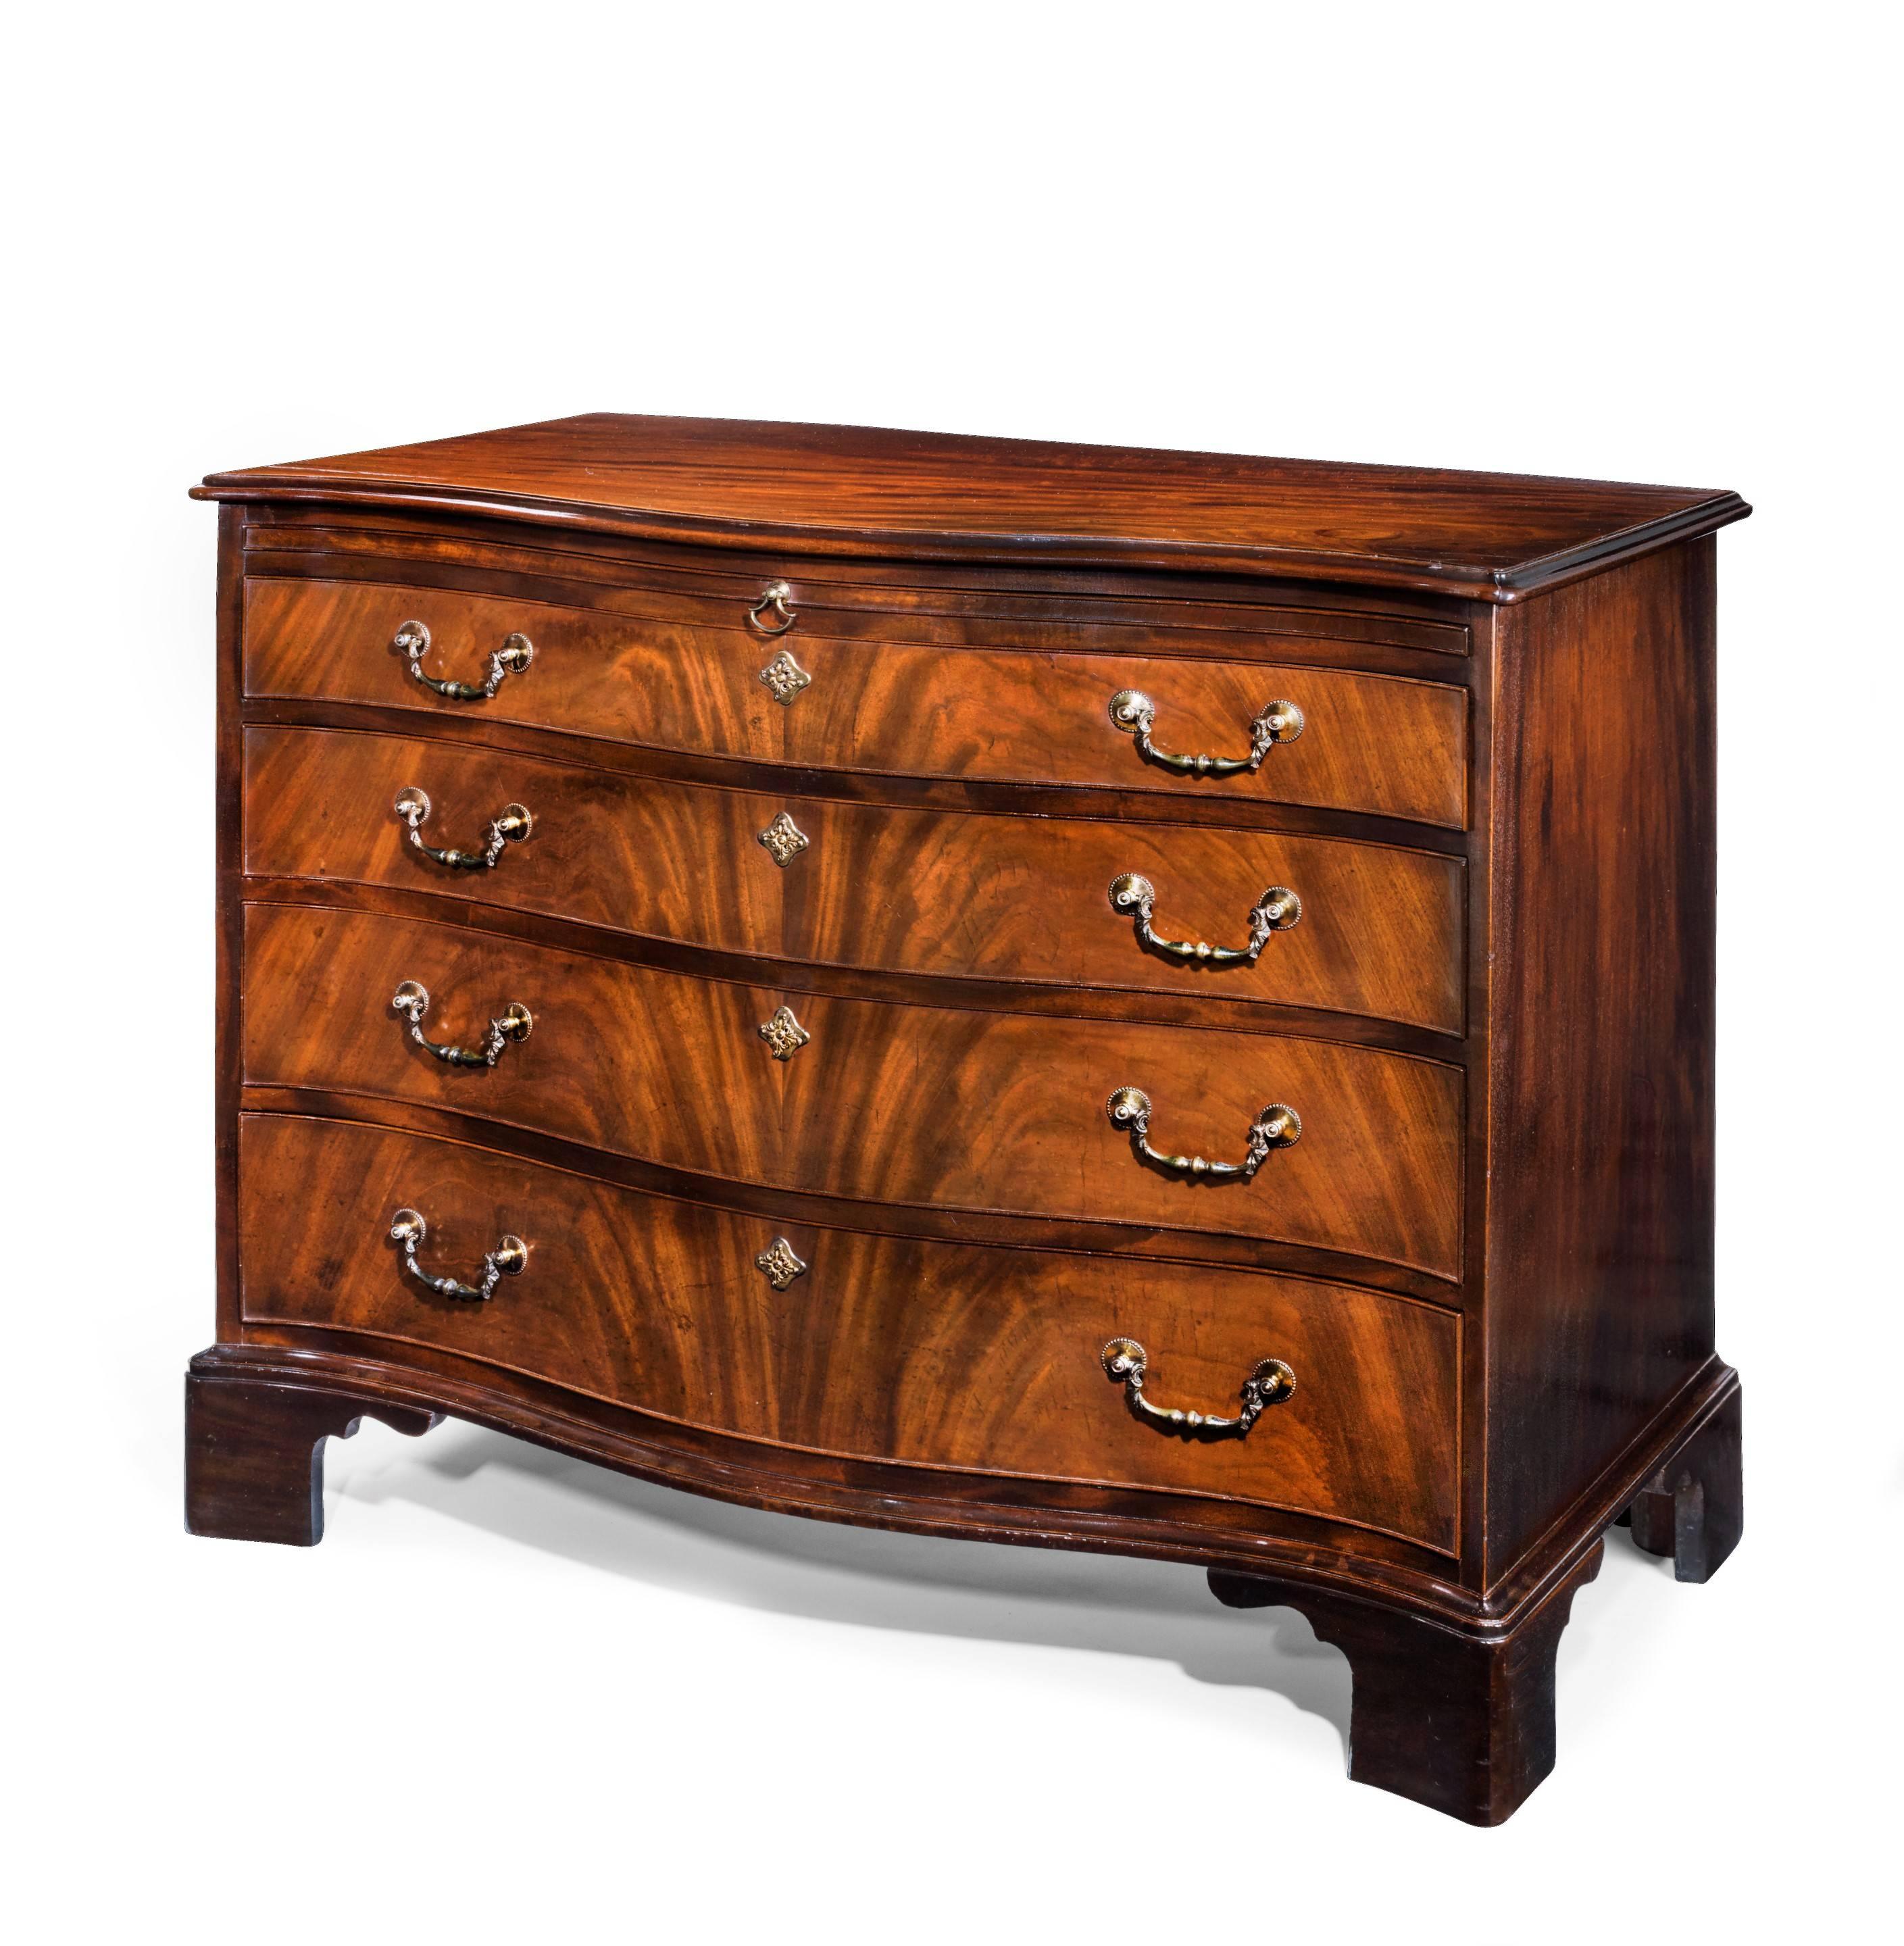 An important and rare George III period mahogany serpentine commode chest, attributed to Thomas Chippendale.

This is a very elegant and restrained chest, of particularly fine quality and in quite extraordinary condition; it glows with an